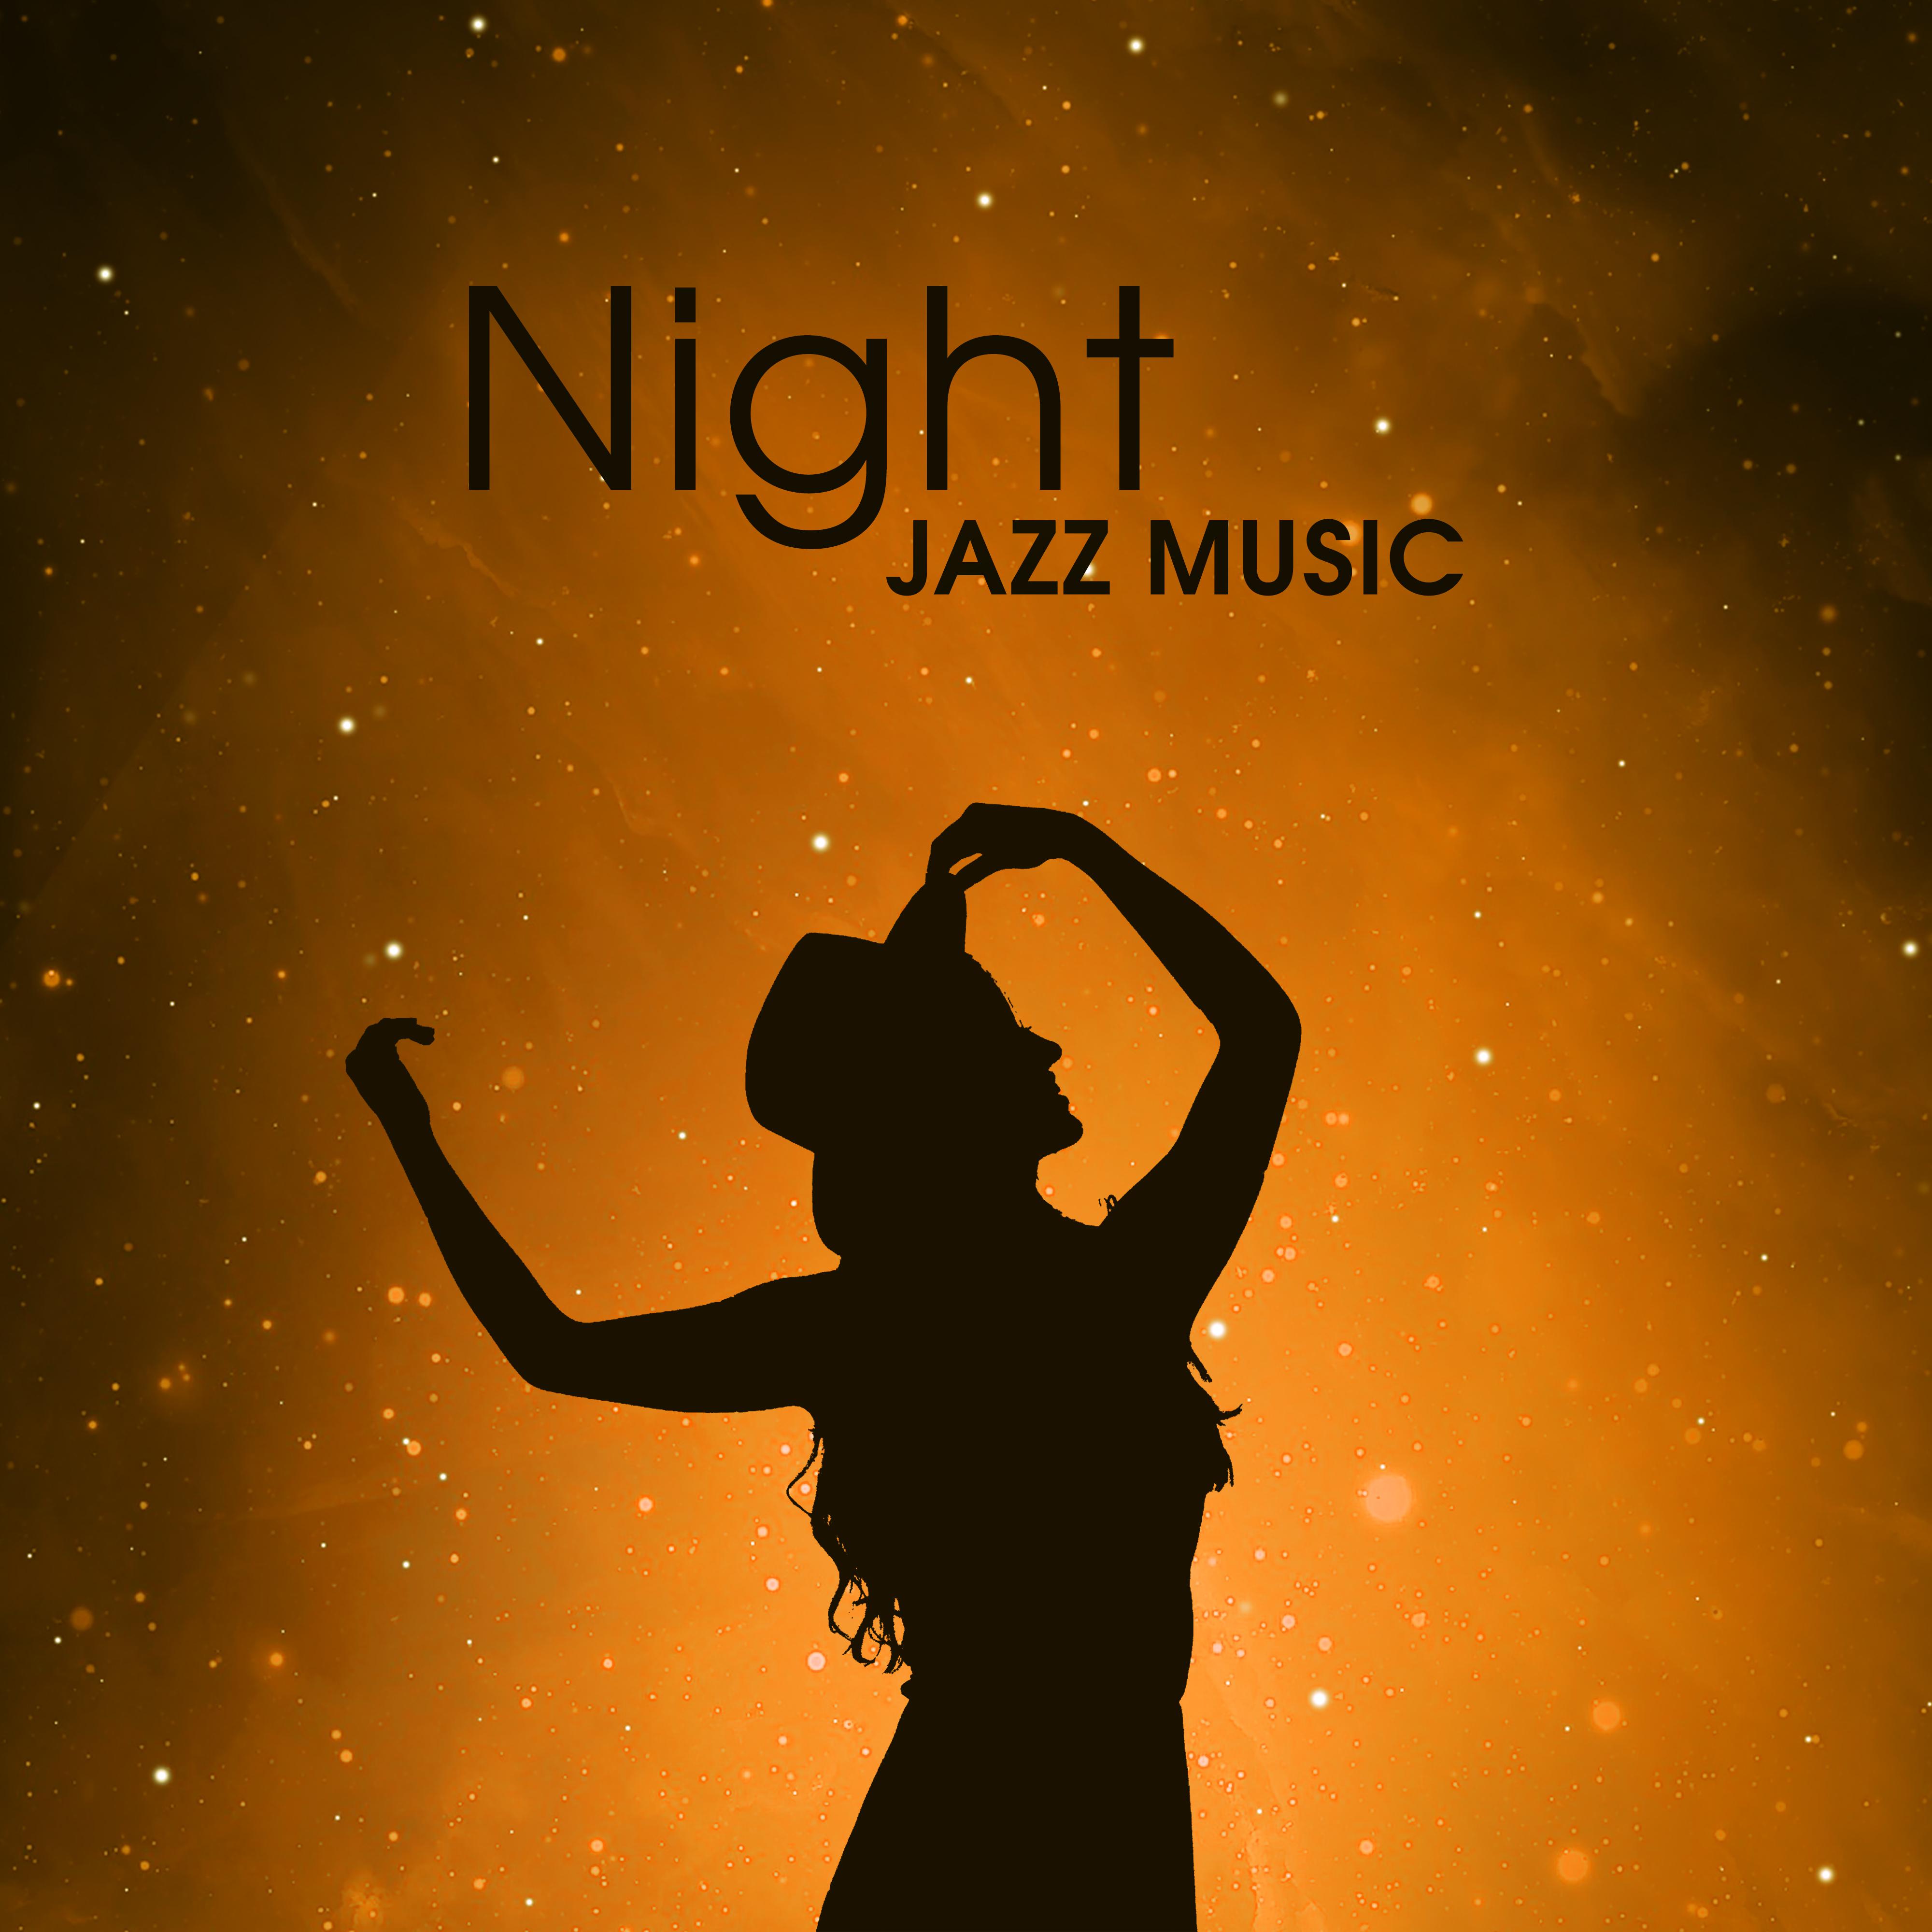 Night Jazz Music  Stress Relief, Music to Rest, Peaceful Sounds, Jazz Relaxation